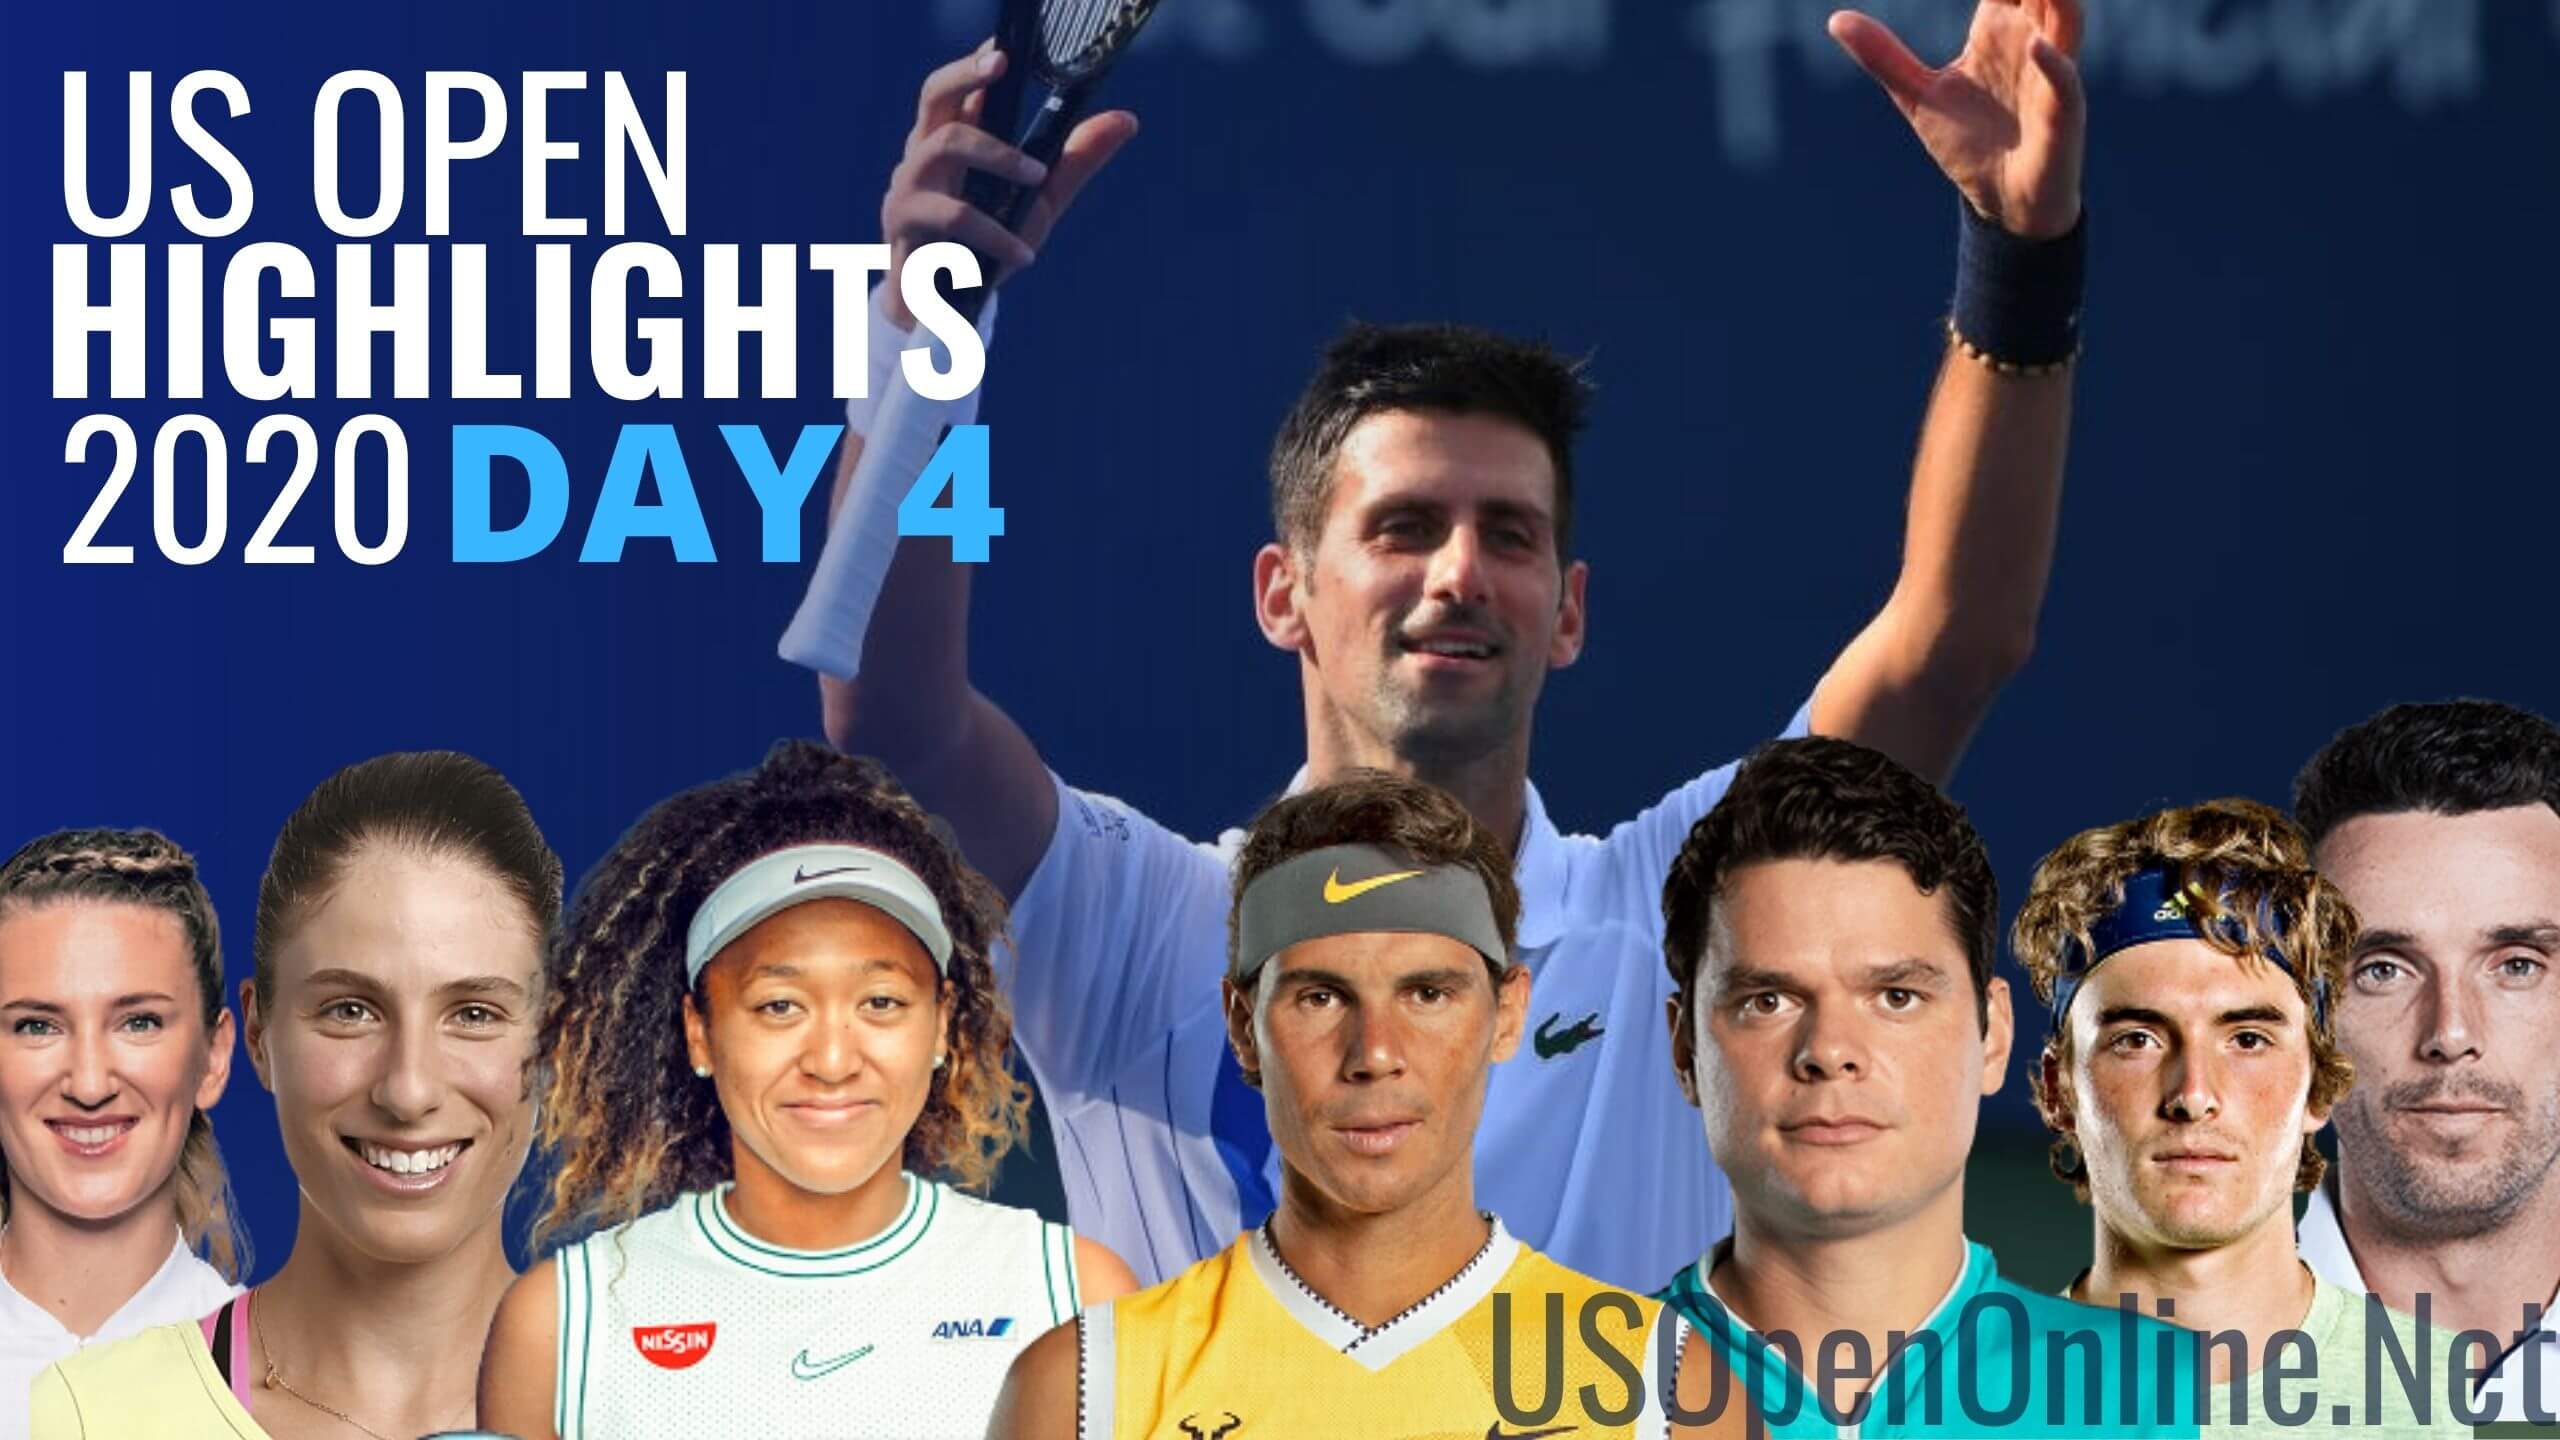 US Open Tennis 2020 Day 4 Complete Match Highlights